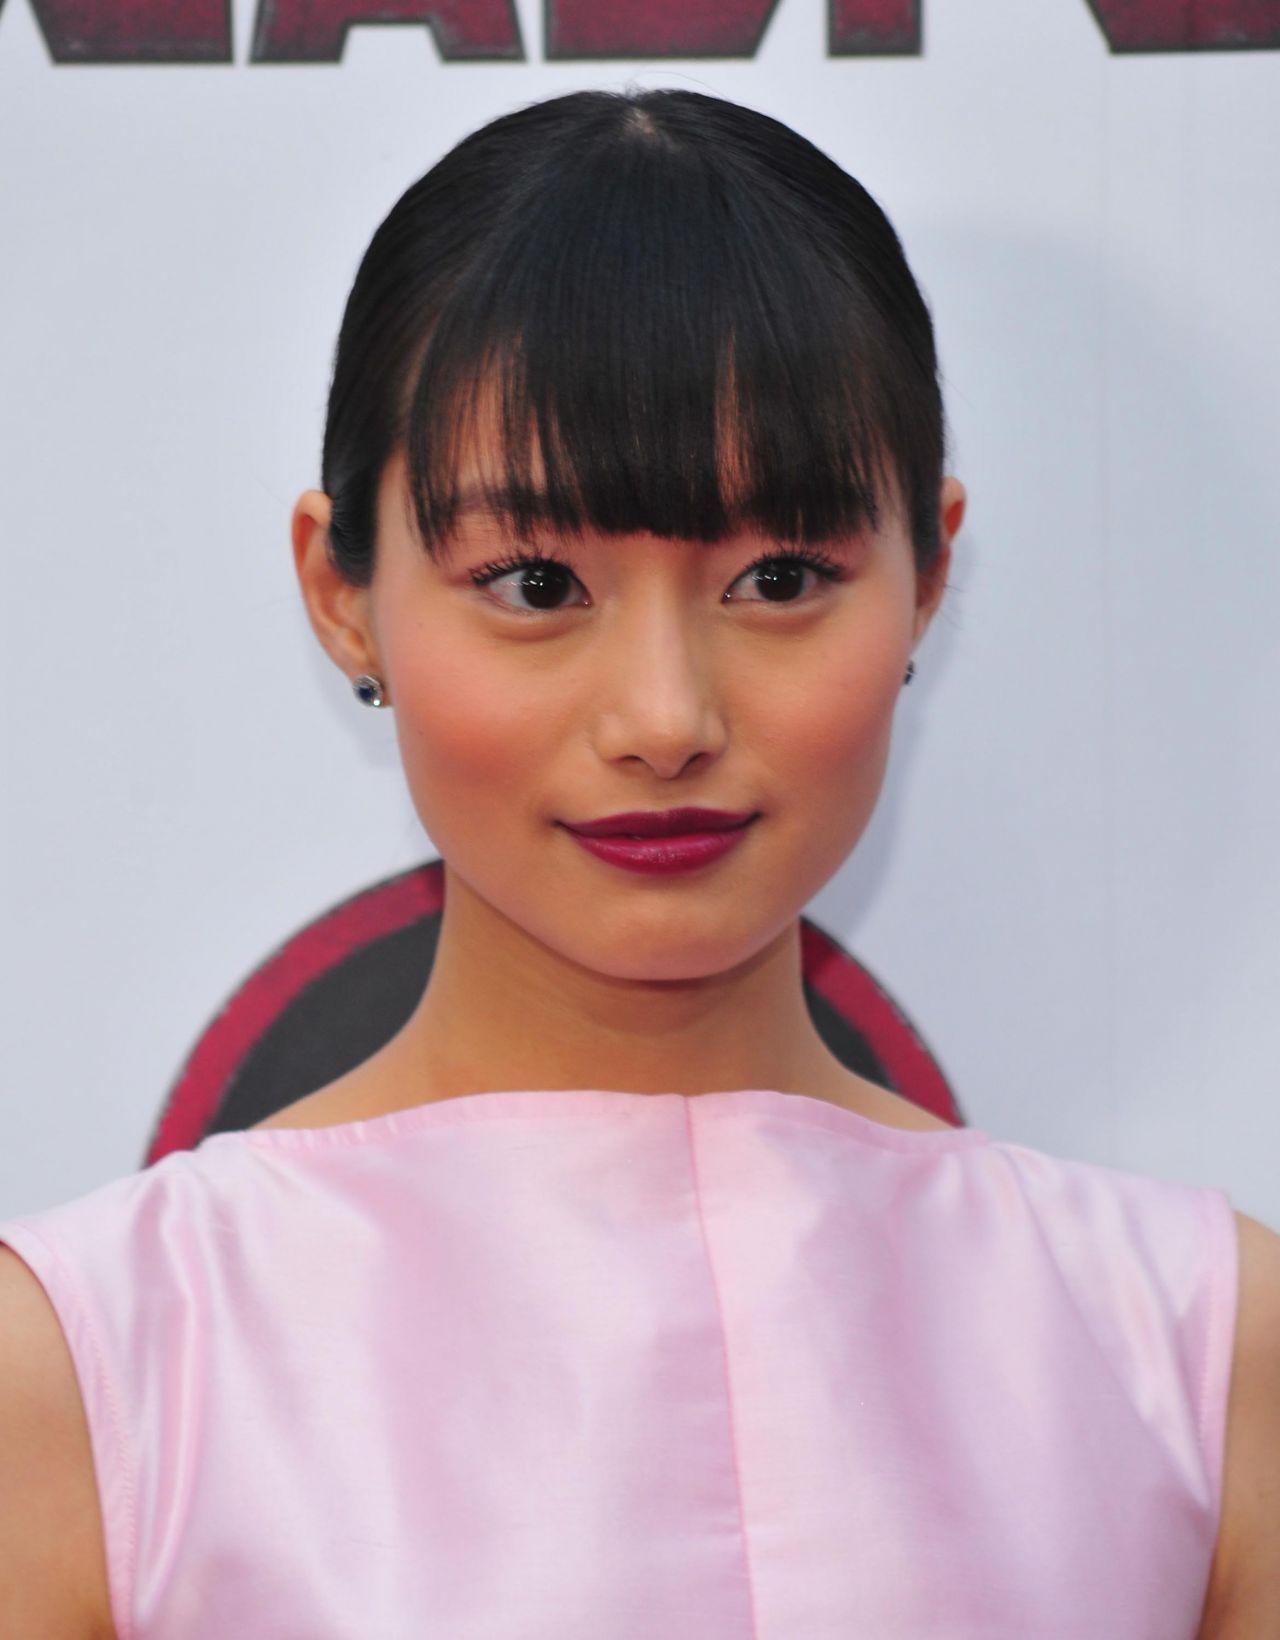 20+ Hot Pictures Of Yukio a.k.a Shiori Kutsuna From Deadpool 2 With Interesting Facts About Her 5